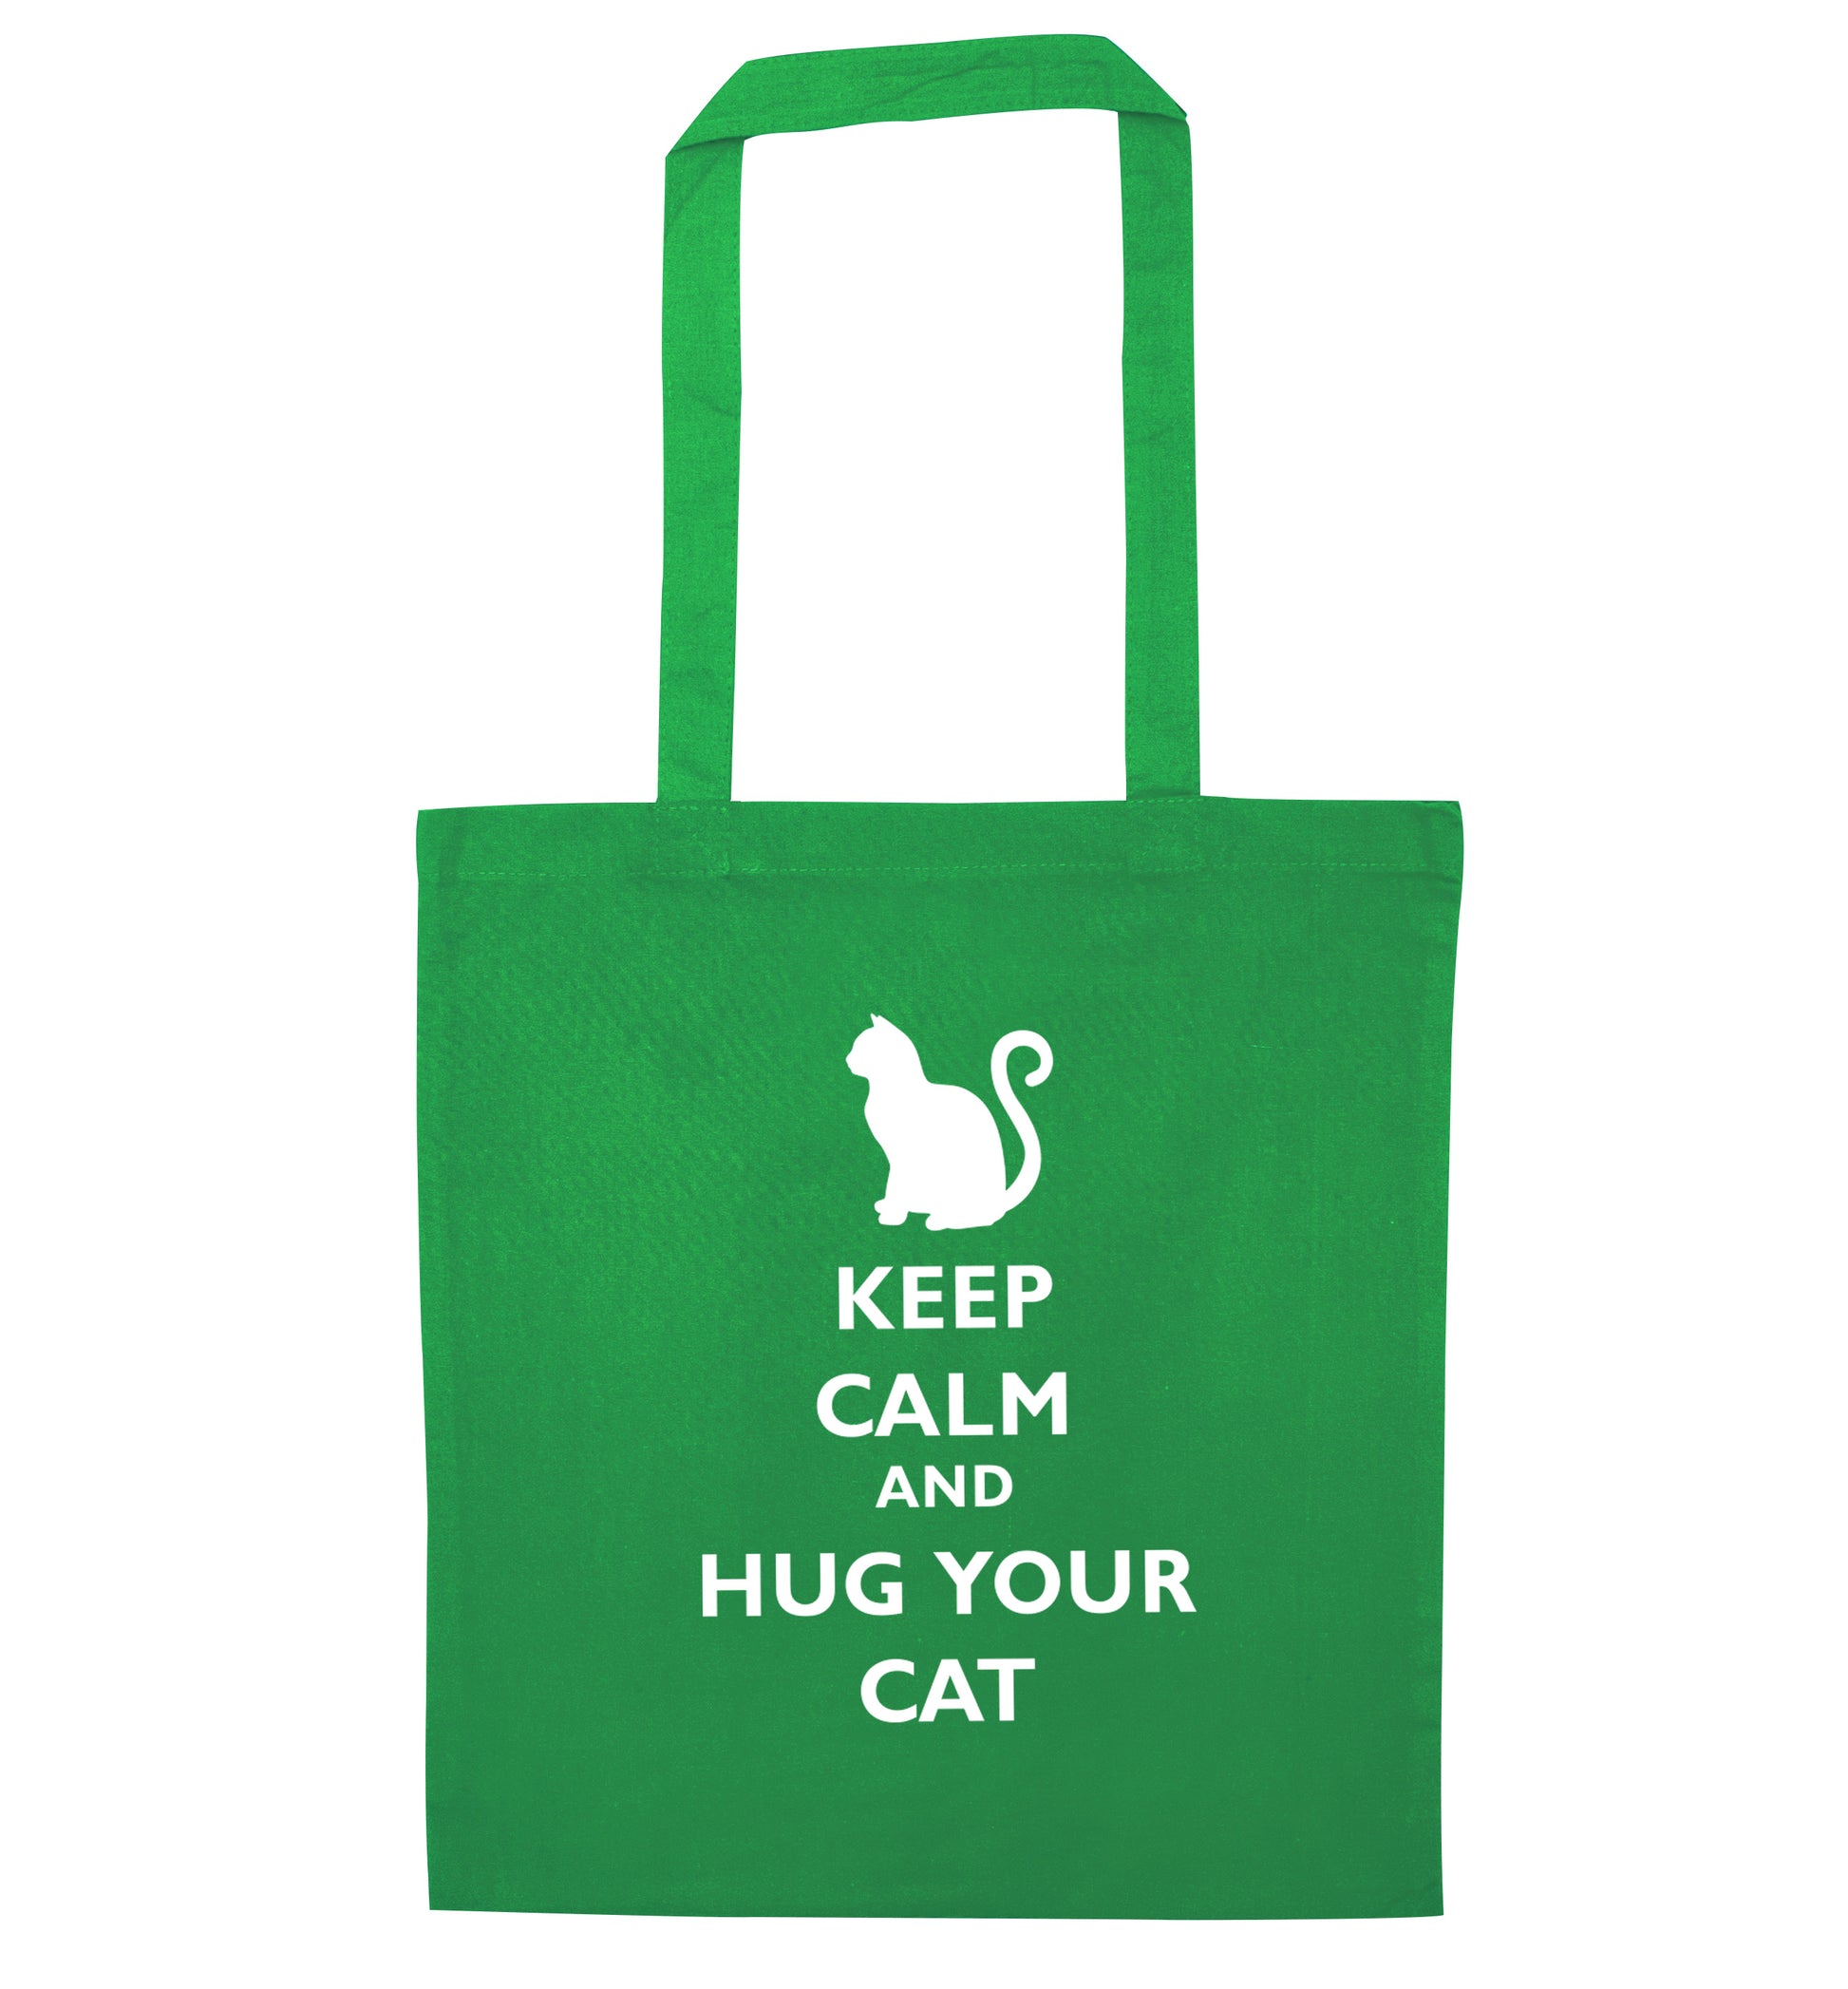 Keep calm and hug your cat green tote bag